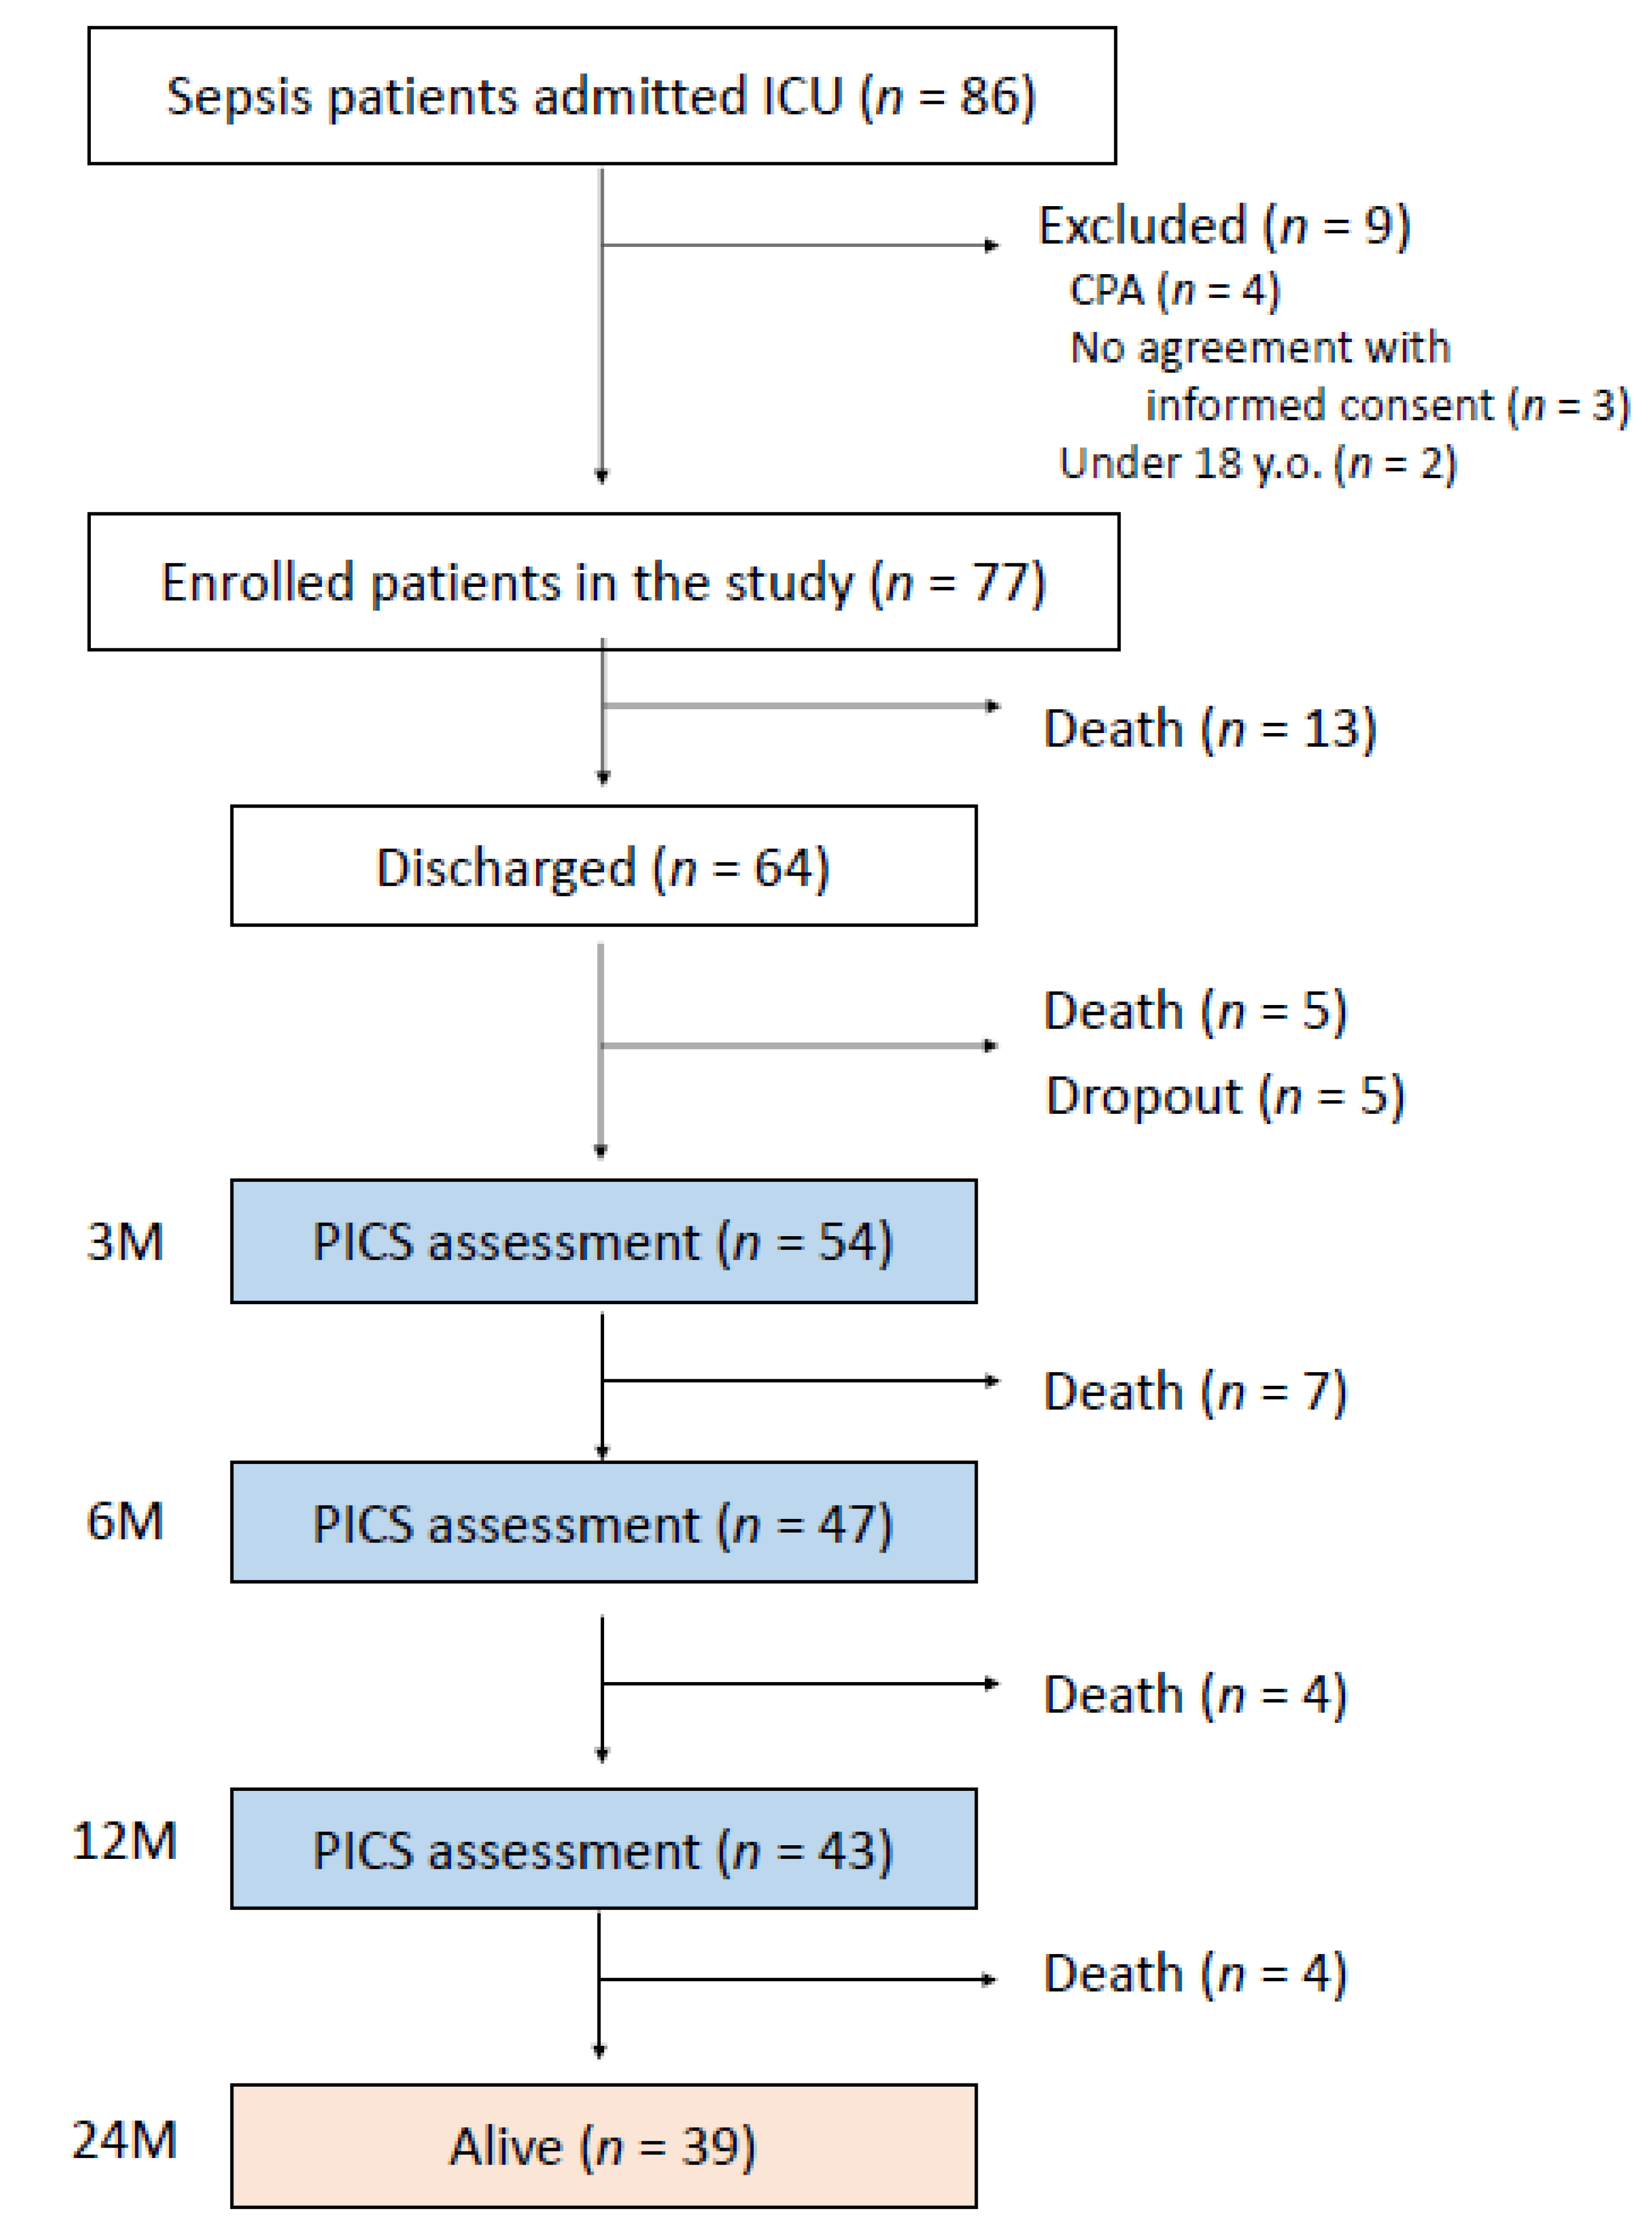 JCM | Free Full-Text | Prevalence and Long-Term Prognosis of Post-Intensive  Care Syndrome after Sepsis: A Single-Center Prospective Observational Study